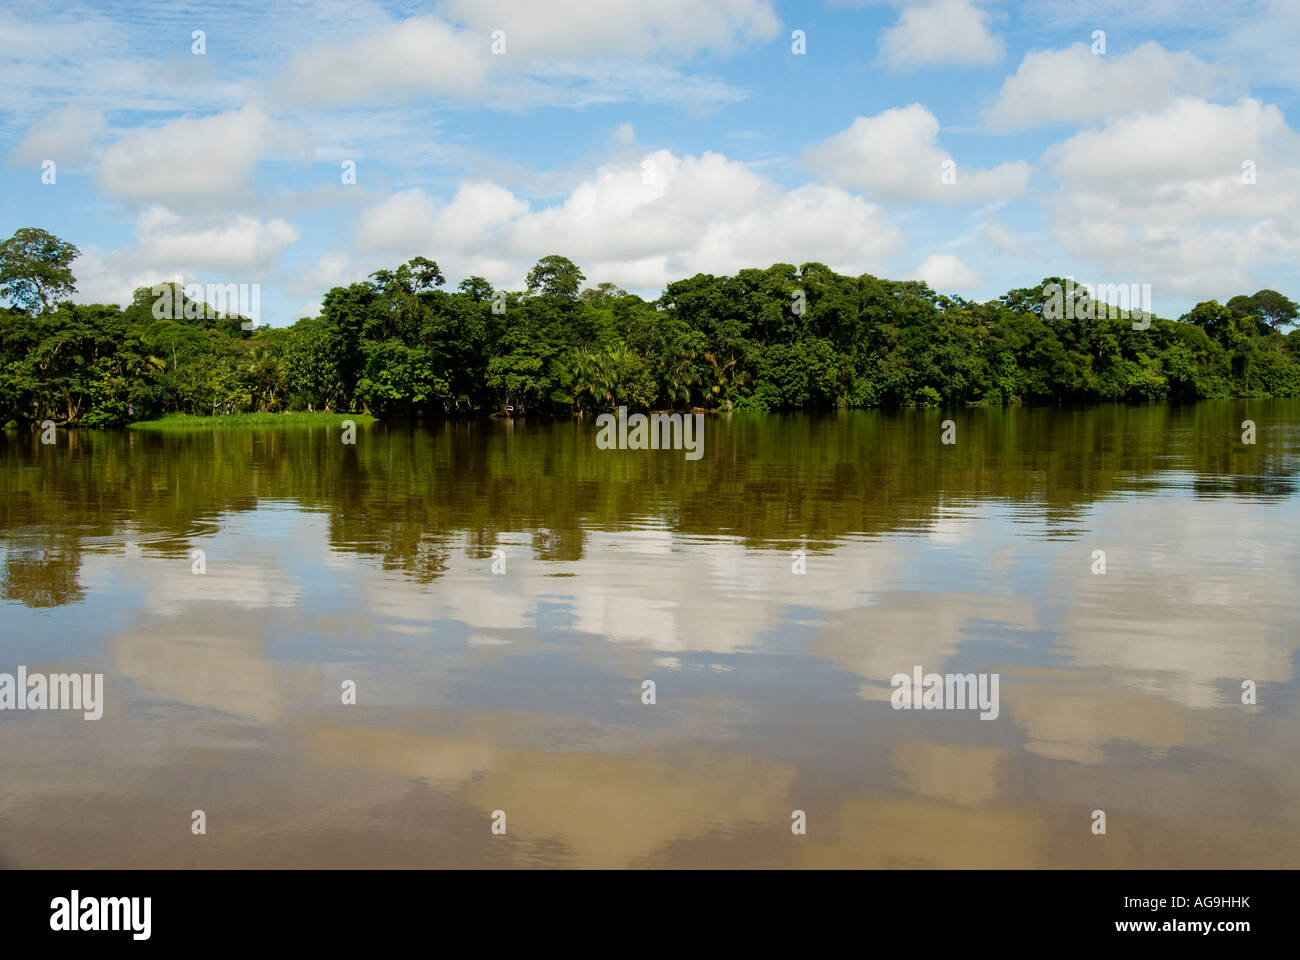 Canals in Tortuguero National Park Costa Rica Stock Photo